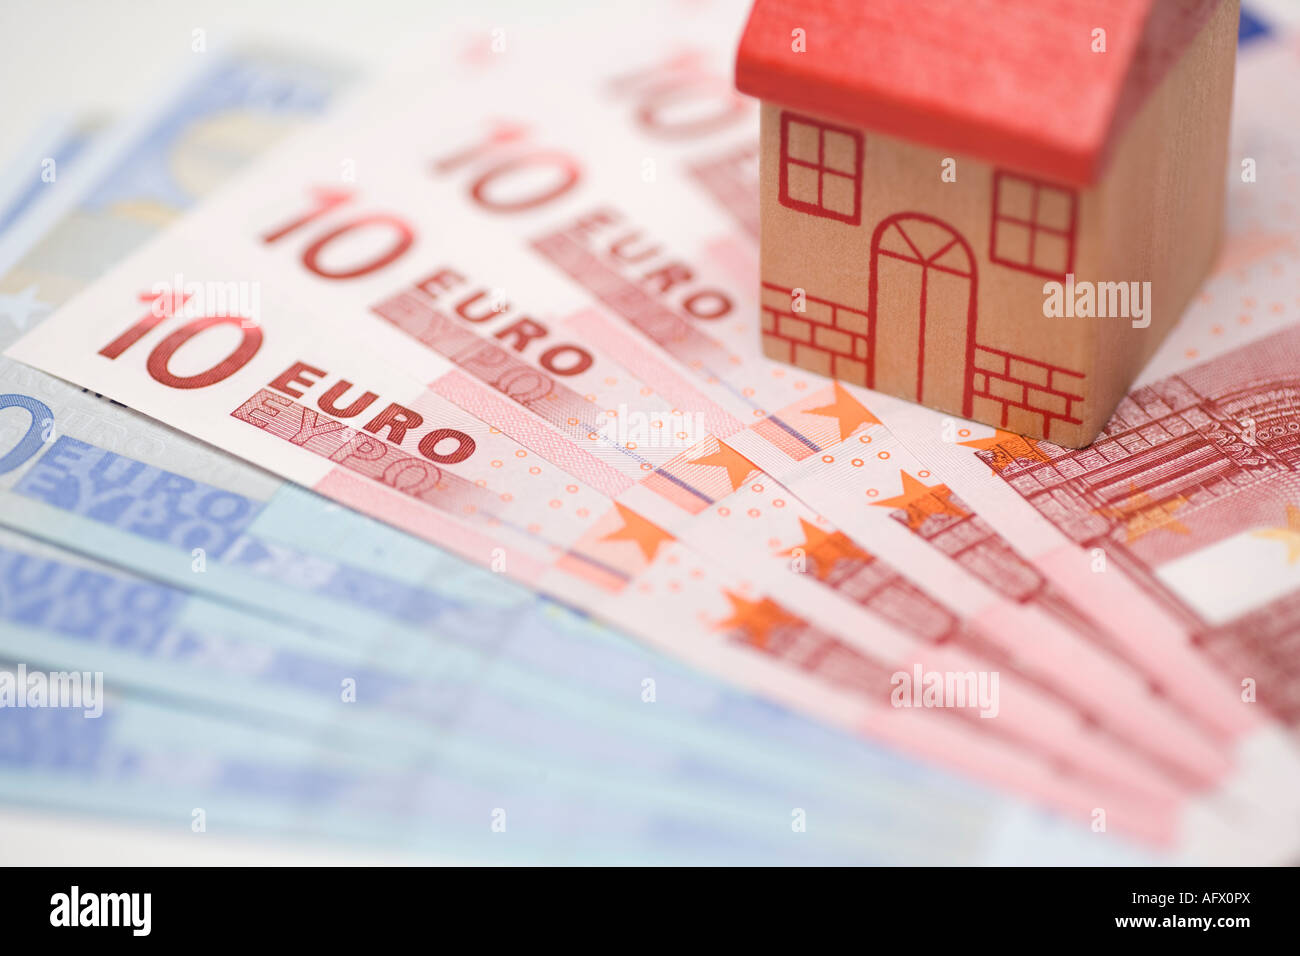 Investing buying property or houses overseas abroad with euros Stock Photo